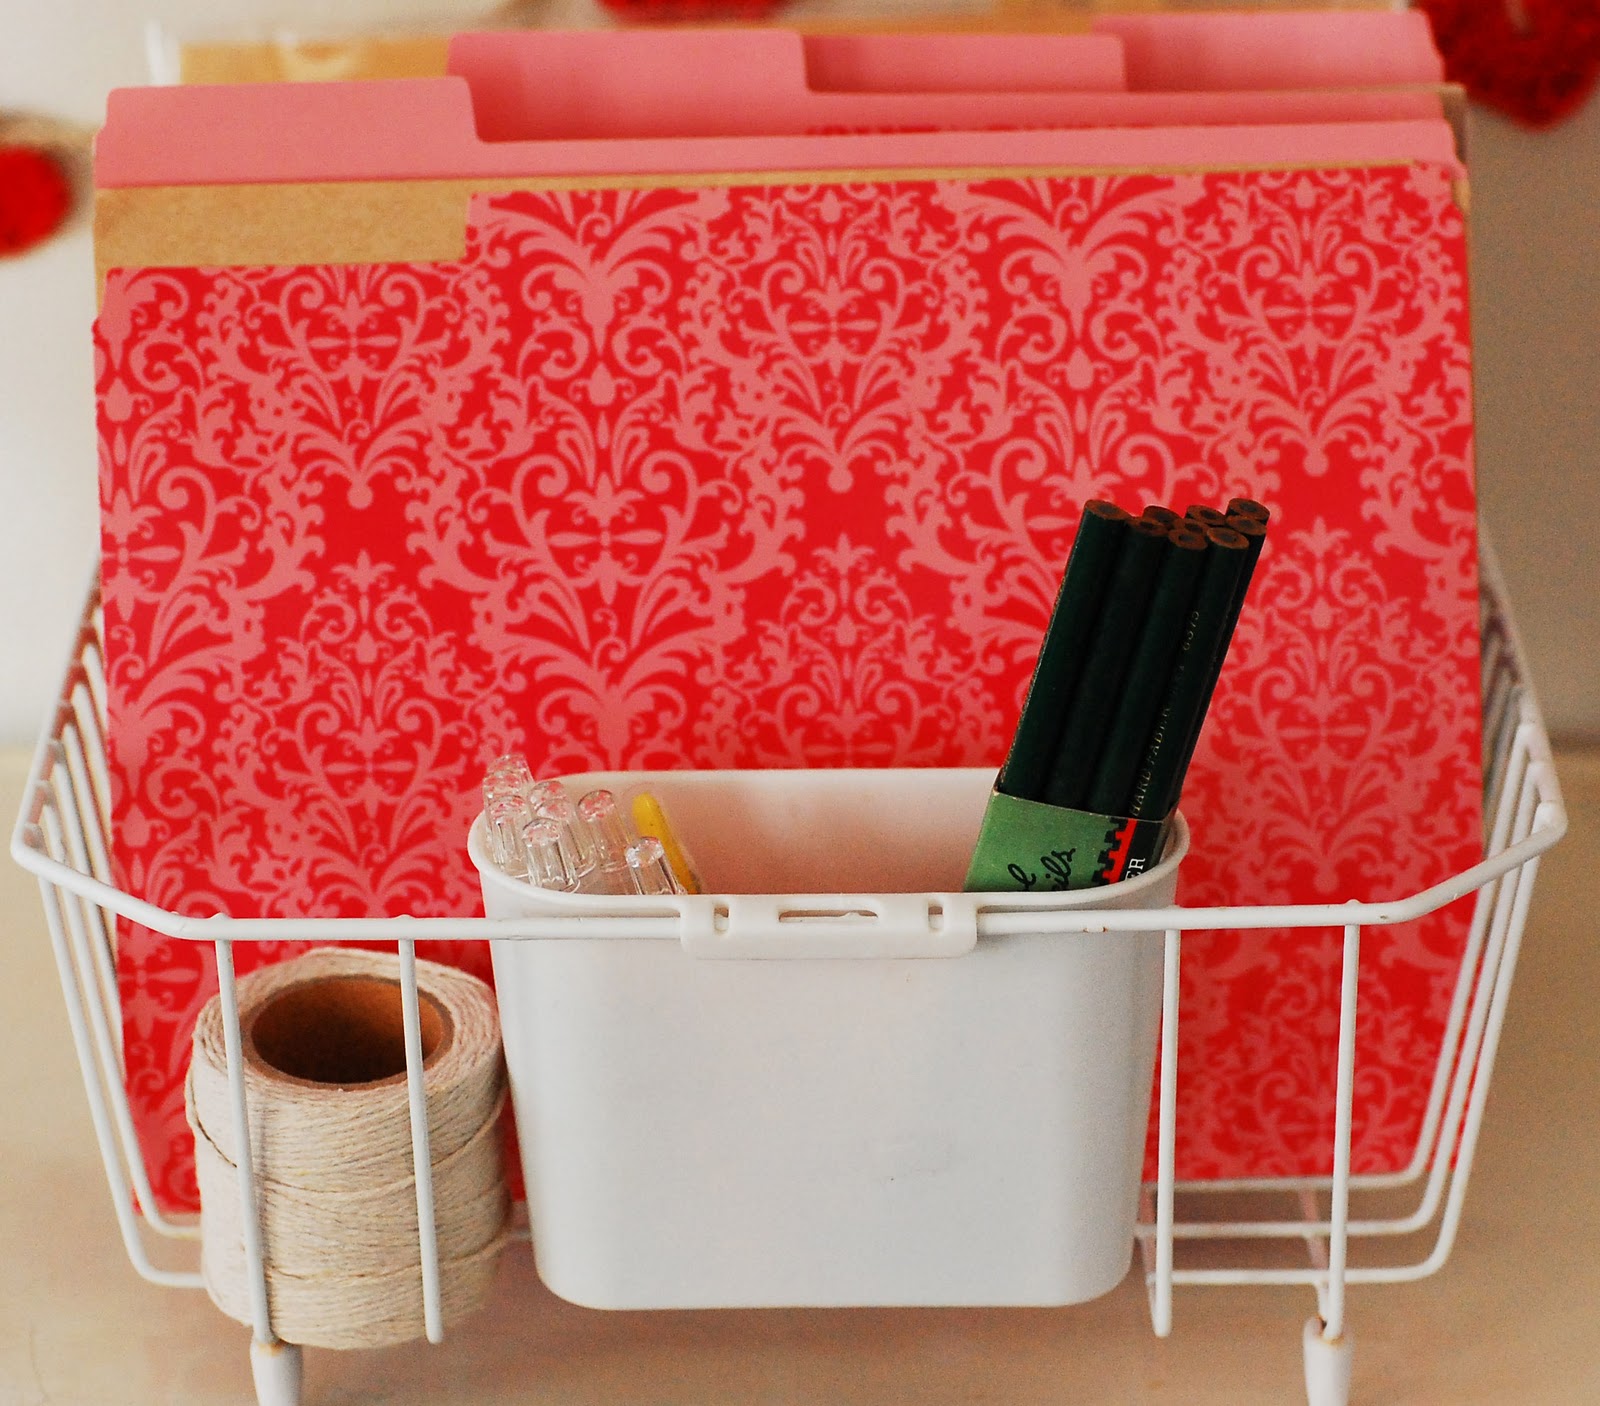 Organize Me – Recycled Dish Rack